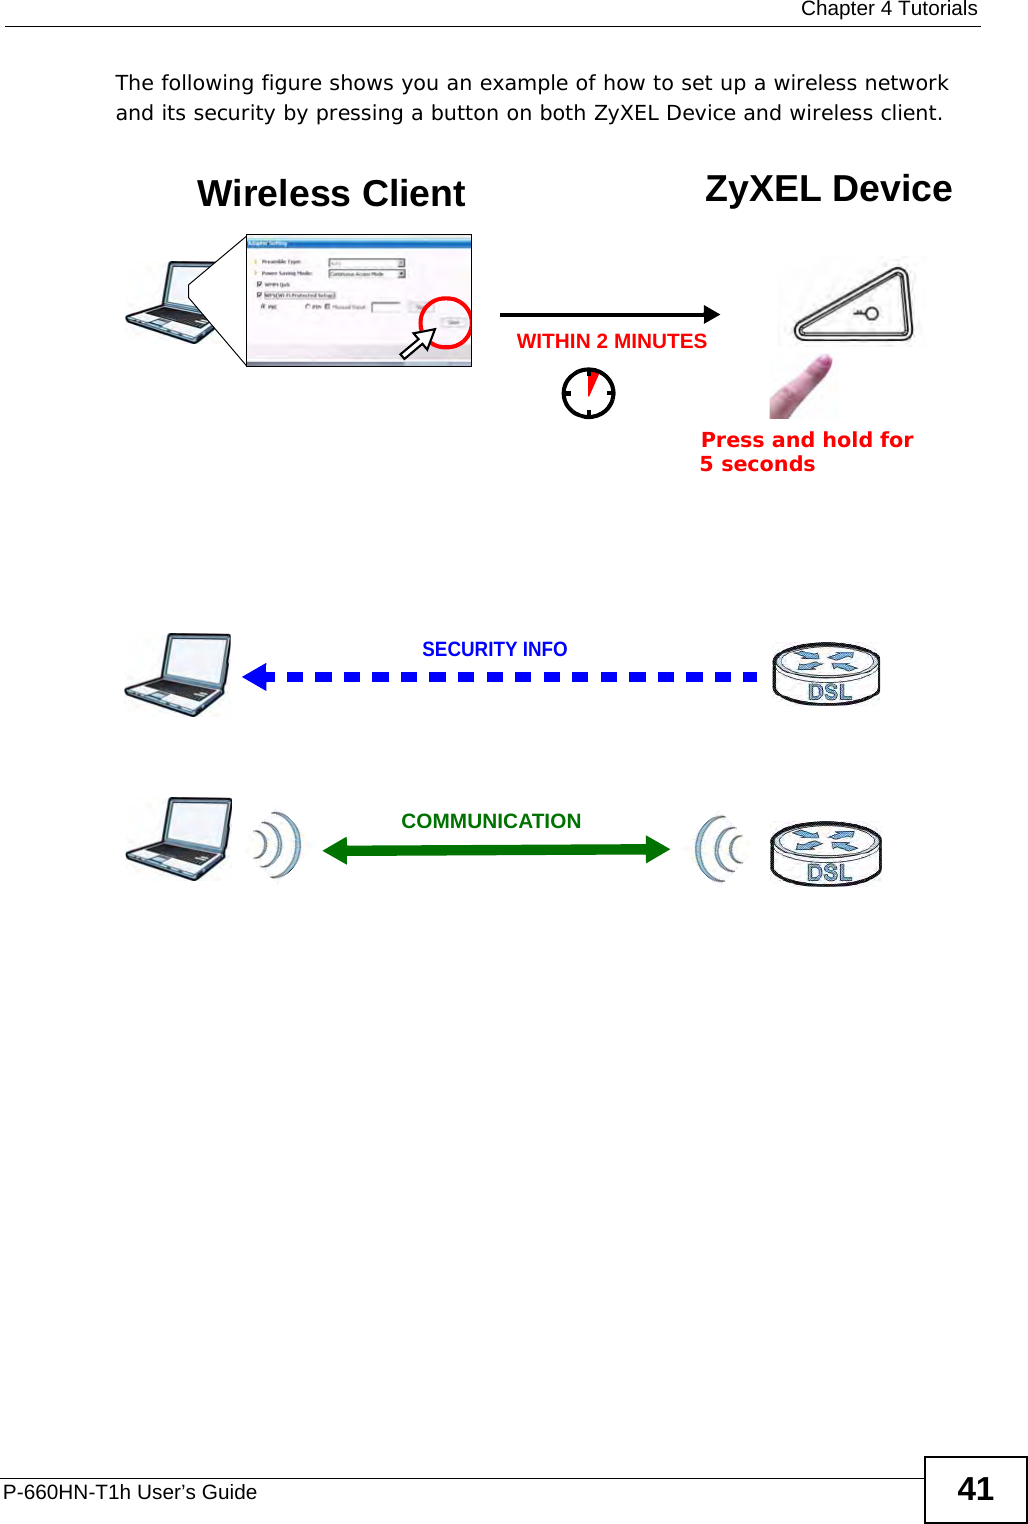  Chapter 4 TutorialsP-660HN-T1h User’s Guide 41The following figure shows you an example of how to set up a wireless network and its security by pressing a button on both ZyXEL Device and wireless client.Example WPS Process: PBC MethodWireless Client ZyXEL DeviceSECURITY INFOCOMMUNICATIONWITHIN 2 MINUTESPress and hold for   5 seconds